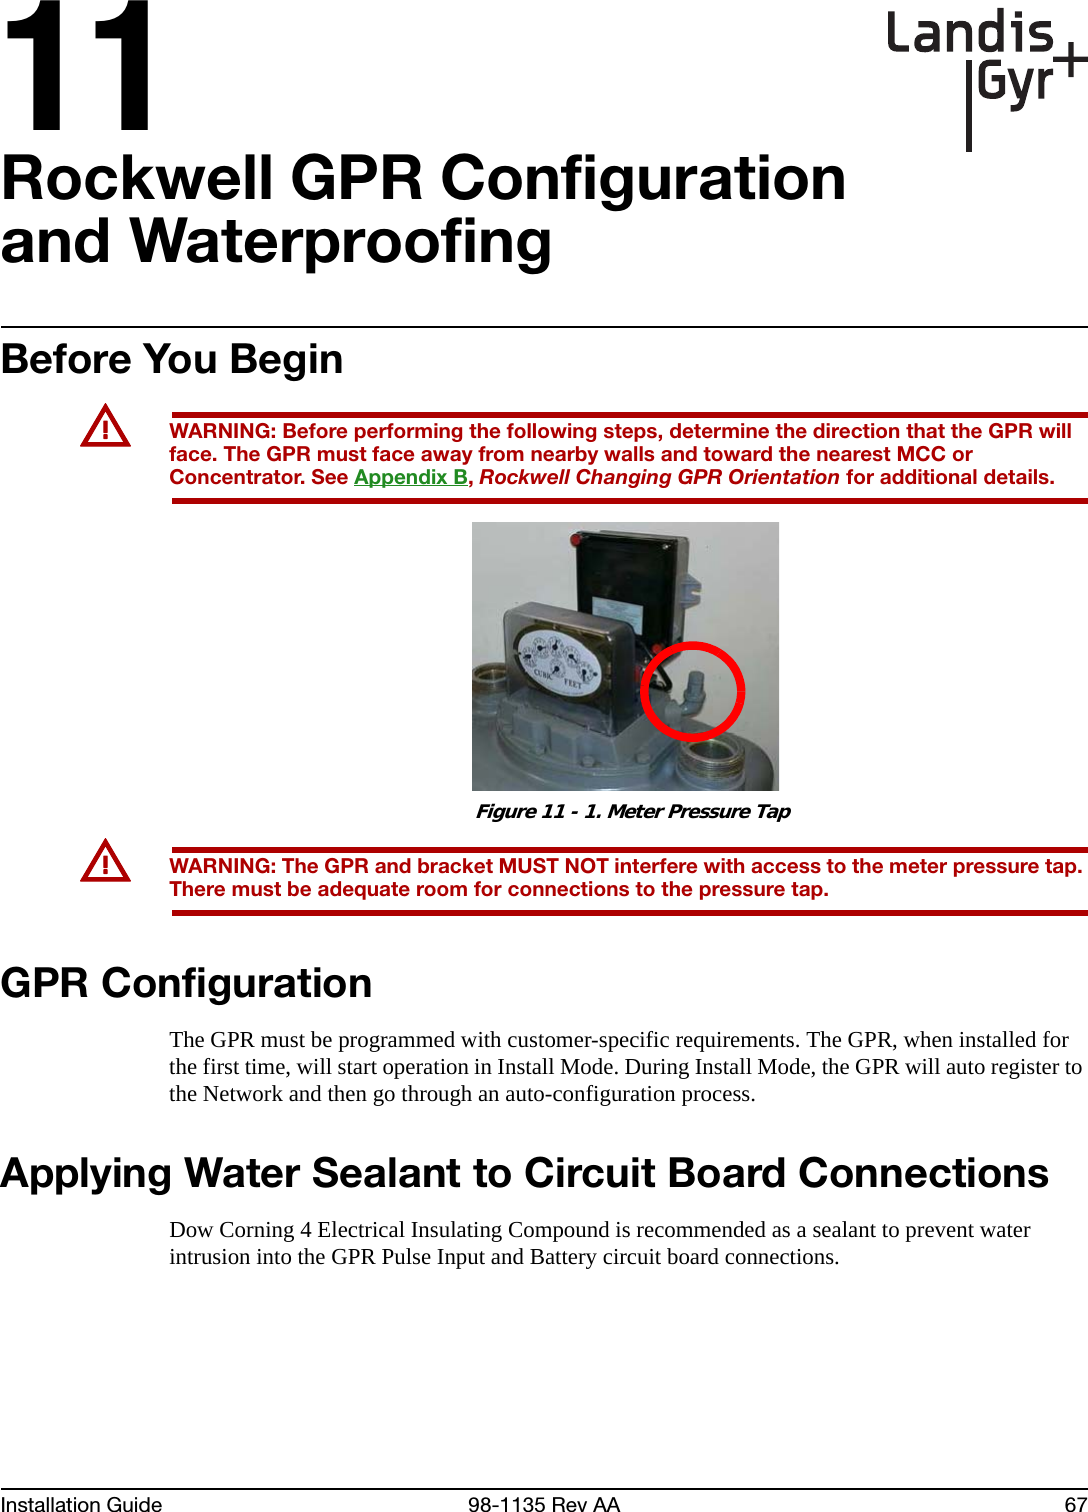 11Installation Guide 98-1135 Rev AA 67Rockwell GPR Configuration and WaterproofingBefore You BeginUWARNING: Before performing the following steps, determine the direction that the GPR will face. The GPR must face away from nearby walls and toward the nearest MCC or Concentrator. See Appendix B, Rockwell Changing GPR Orientation for additional details. Figure 11 - 1. Meter Pressure TapUWARNING: The GPR and bracket MUST NOT interfere with access to the meter pressure tap. There must be adequate room for connections to the pressure tap.GPR ConfigurationThe GPR must be programmed with customer-specific requirements. The GPR, when installed for the first time, will start operation in Install Mode. During Install Mode, the GPR will auto register to the Network and then go through an auto-configuration process.Applying Water Sealant to Circuit Board Connections Dow Corning 4 Electrical Insulating Compound is recommended as a sealant to prevent water intrusion into the GPR Pulse Input and Battery circuit board connections.